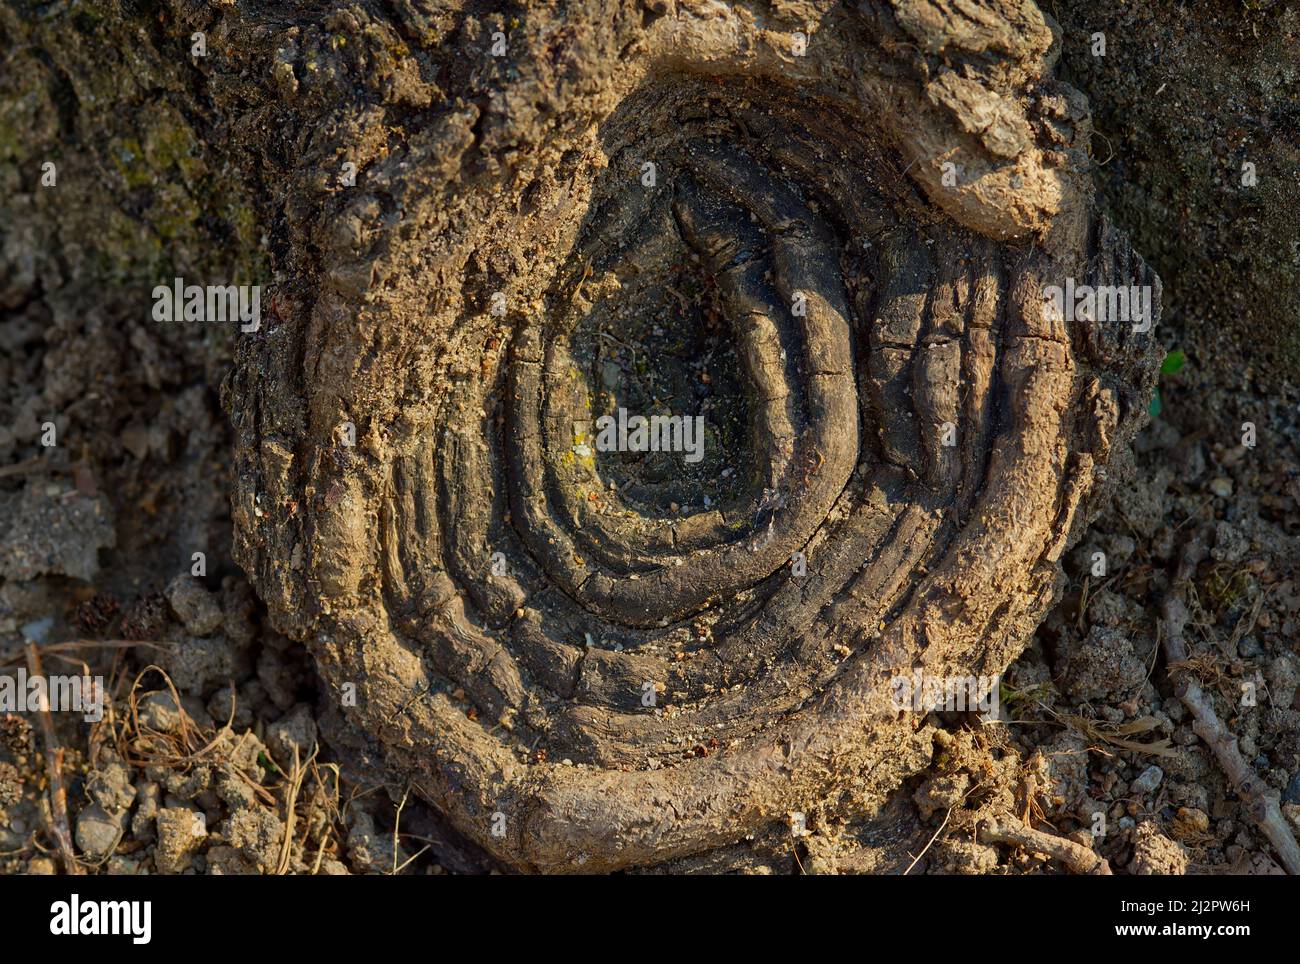 closeup view of a root of a tree in a curious spiral habit Stock Photo